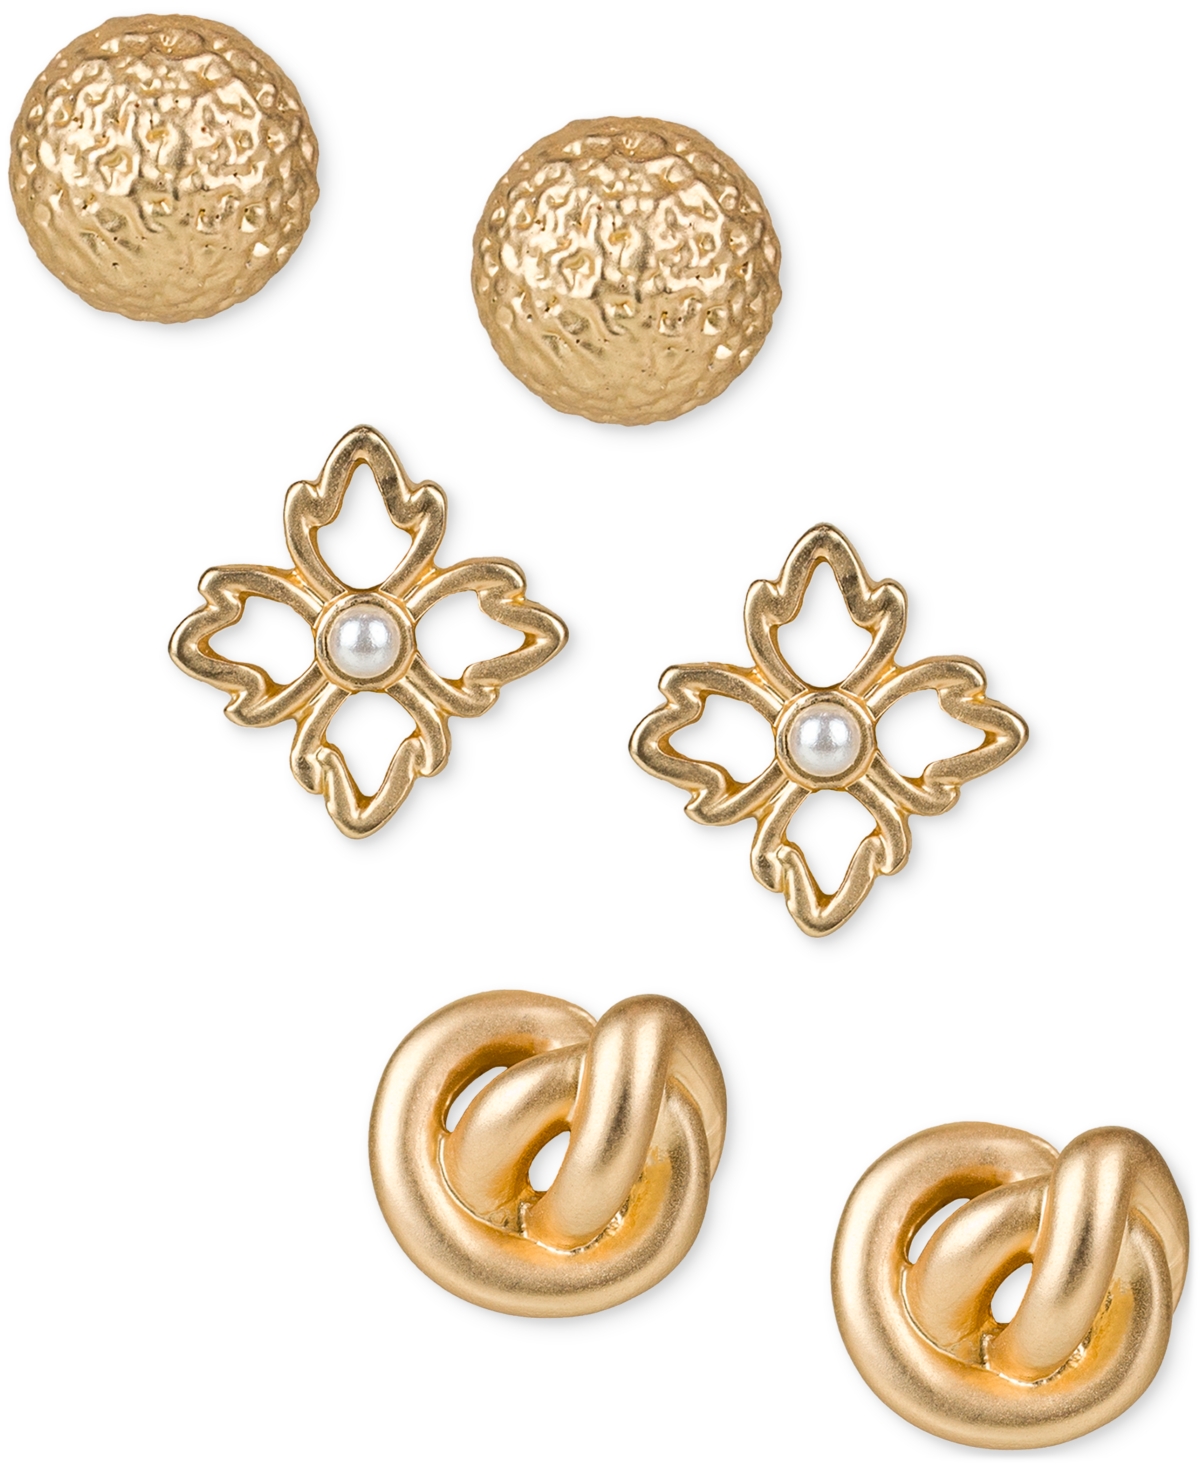 Patricia Nash Gold-tone 3-pc. Set Textured, Imitation Pearl Open Floret & Knot Stud Earrings In Egyptian Gold